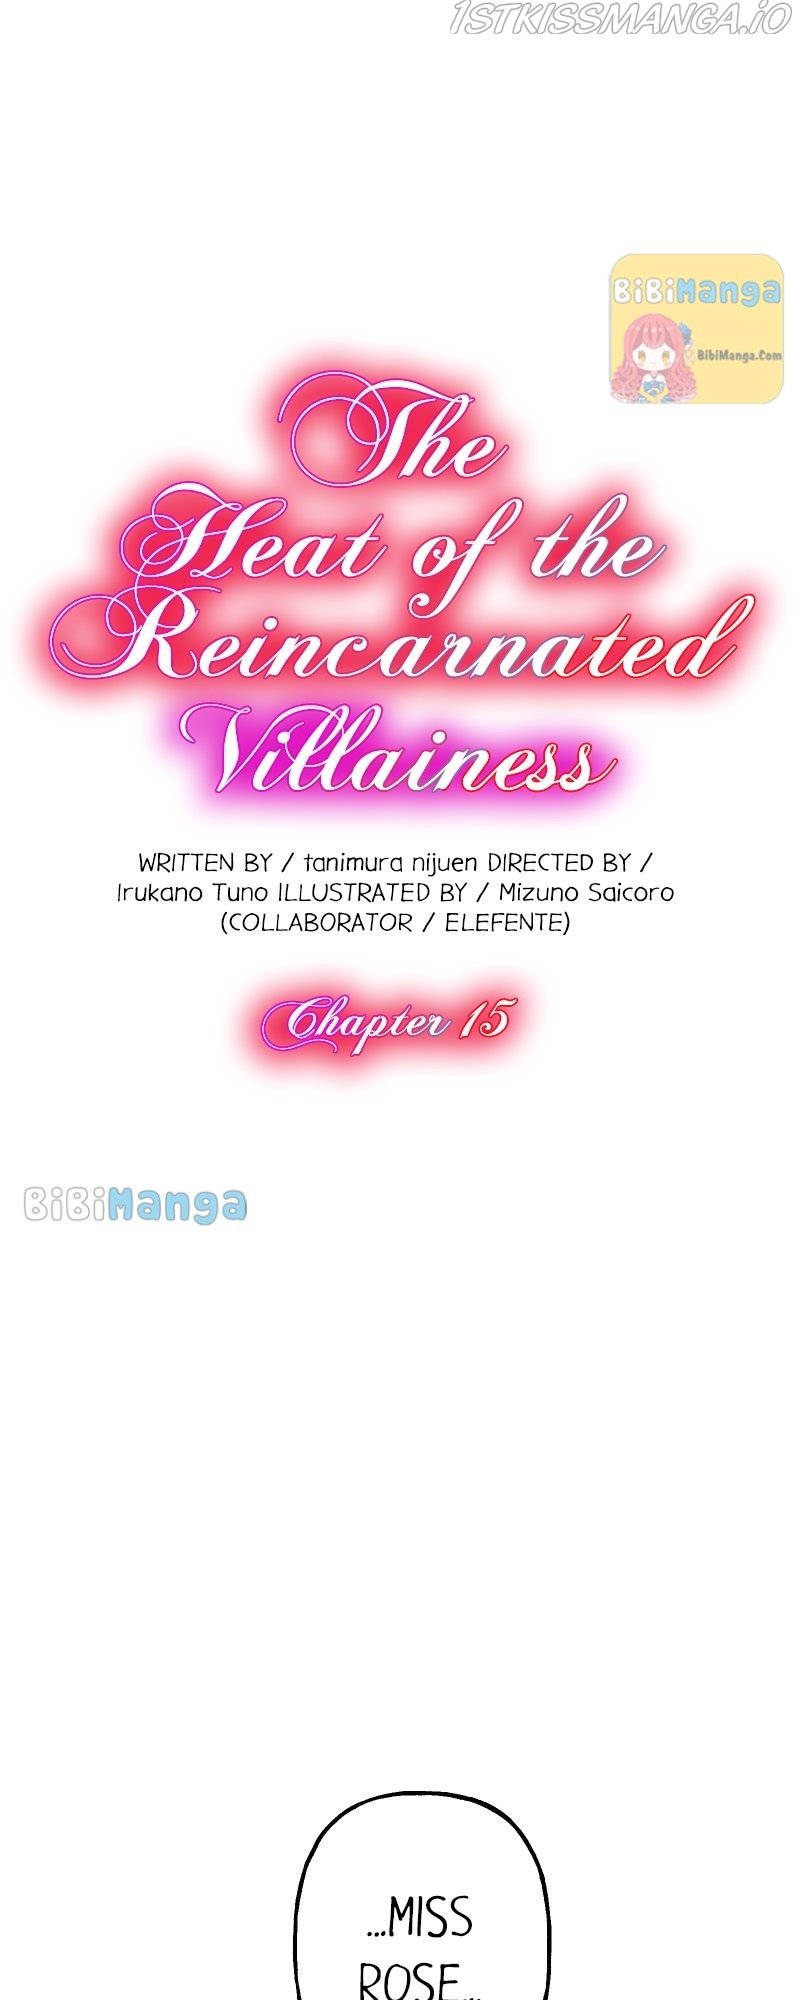 The Heat of the Reincarnated Villainess chapter 15